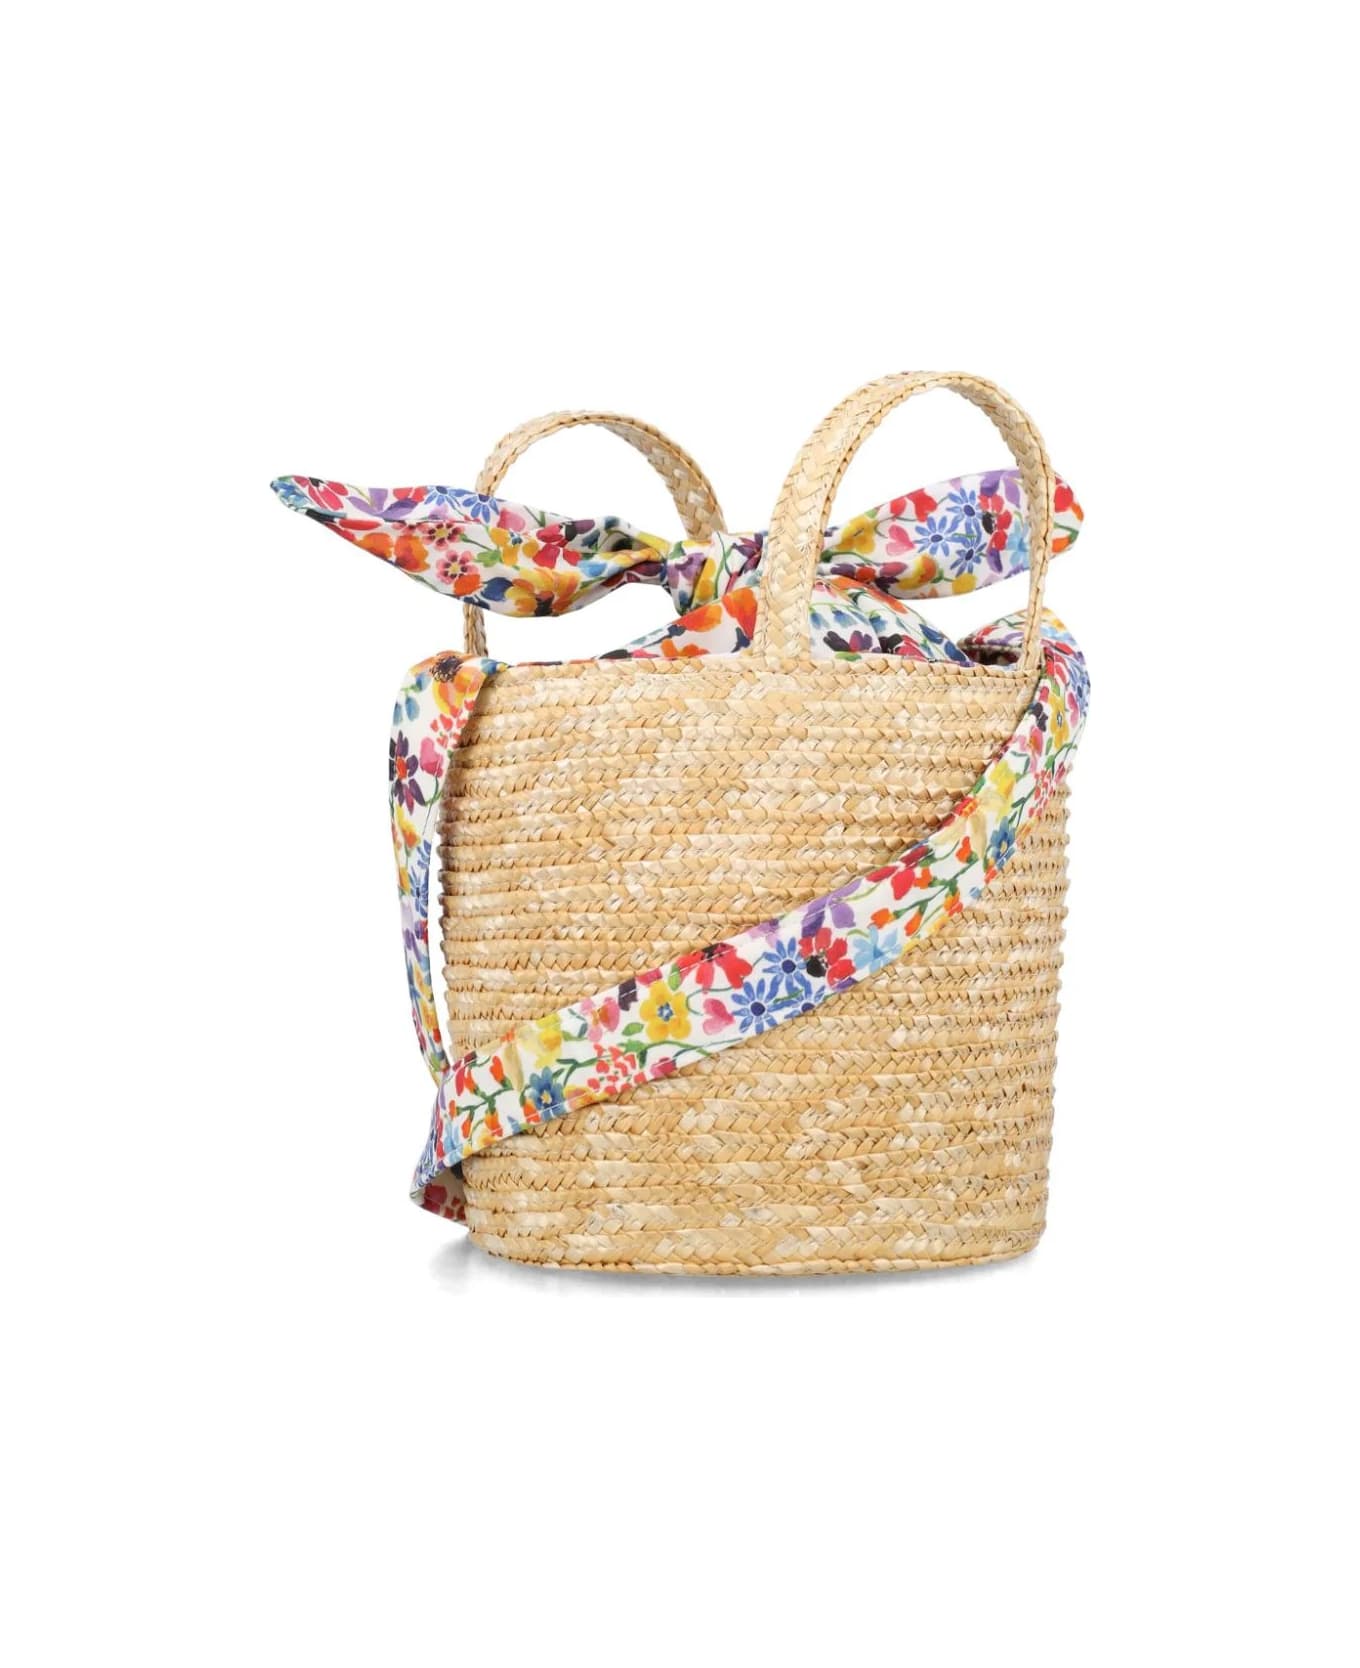 Il Gufo Liberty Fabric Cotton And Natural Straw Bucket Bag - Multicolour アクセサリー＆ギフト